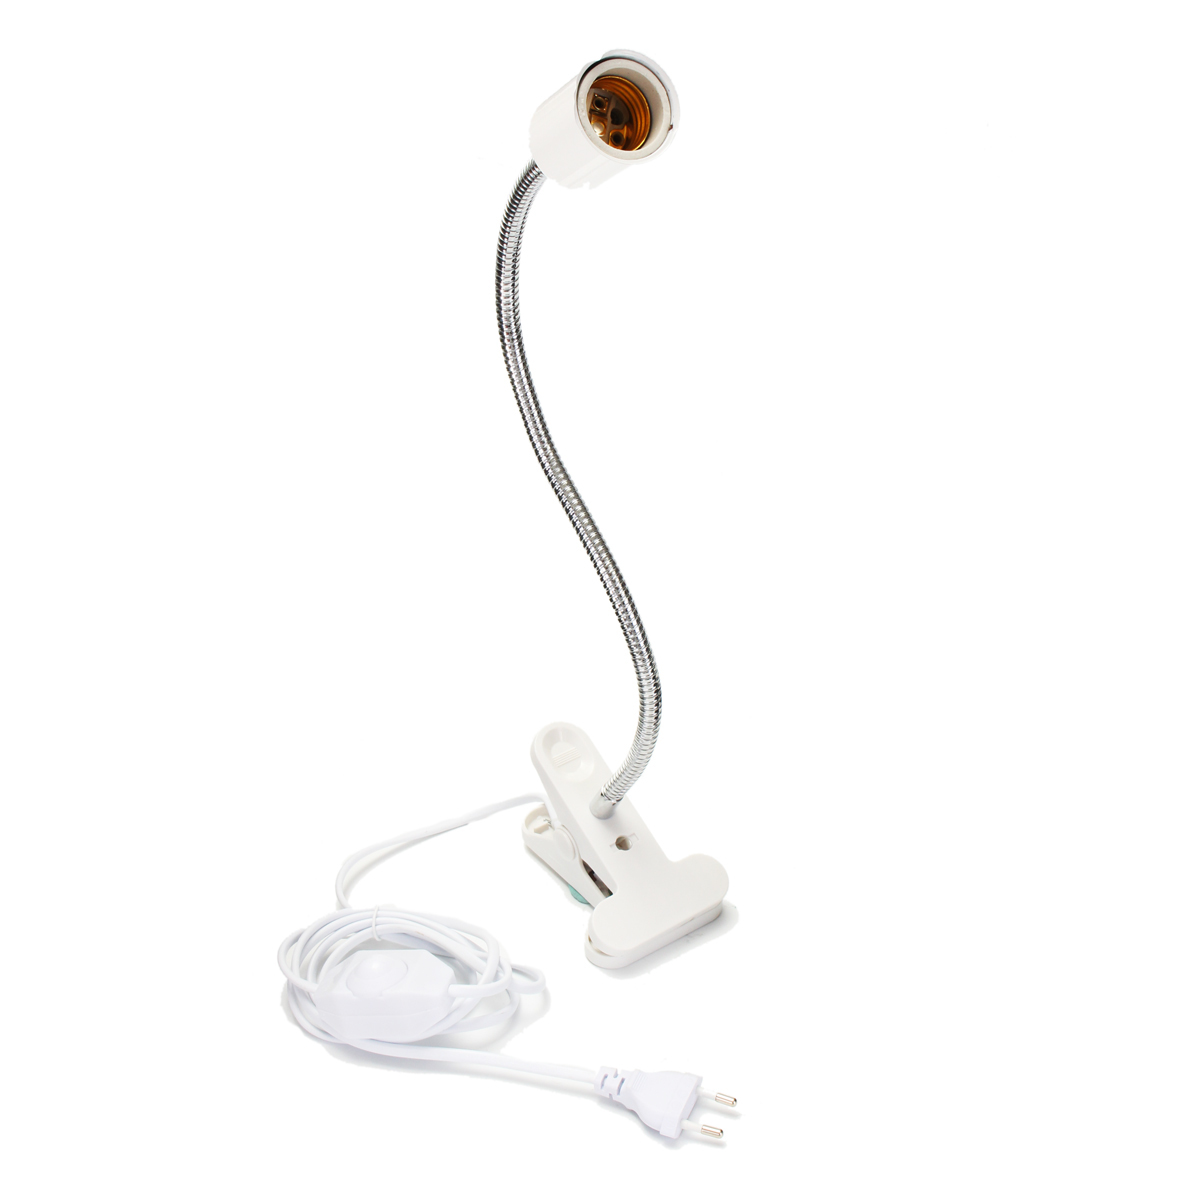 30CM-E27-Flexible-Pet-Heat-Light-Bulb-Adapter-Lamp-Holder-Socket-with-Clip-Dimming-Switch-1309671-3